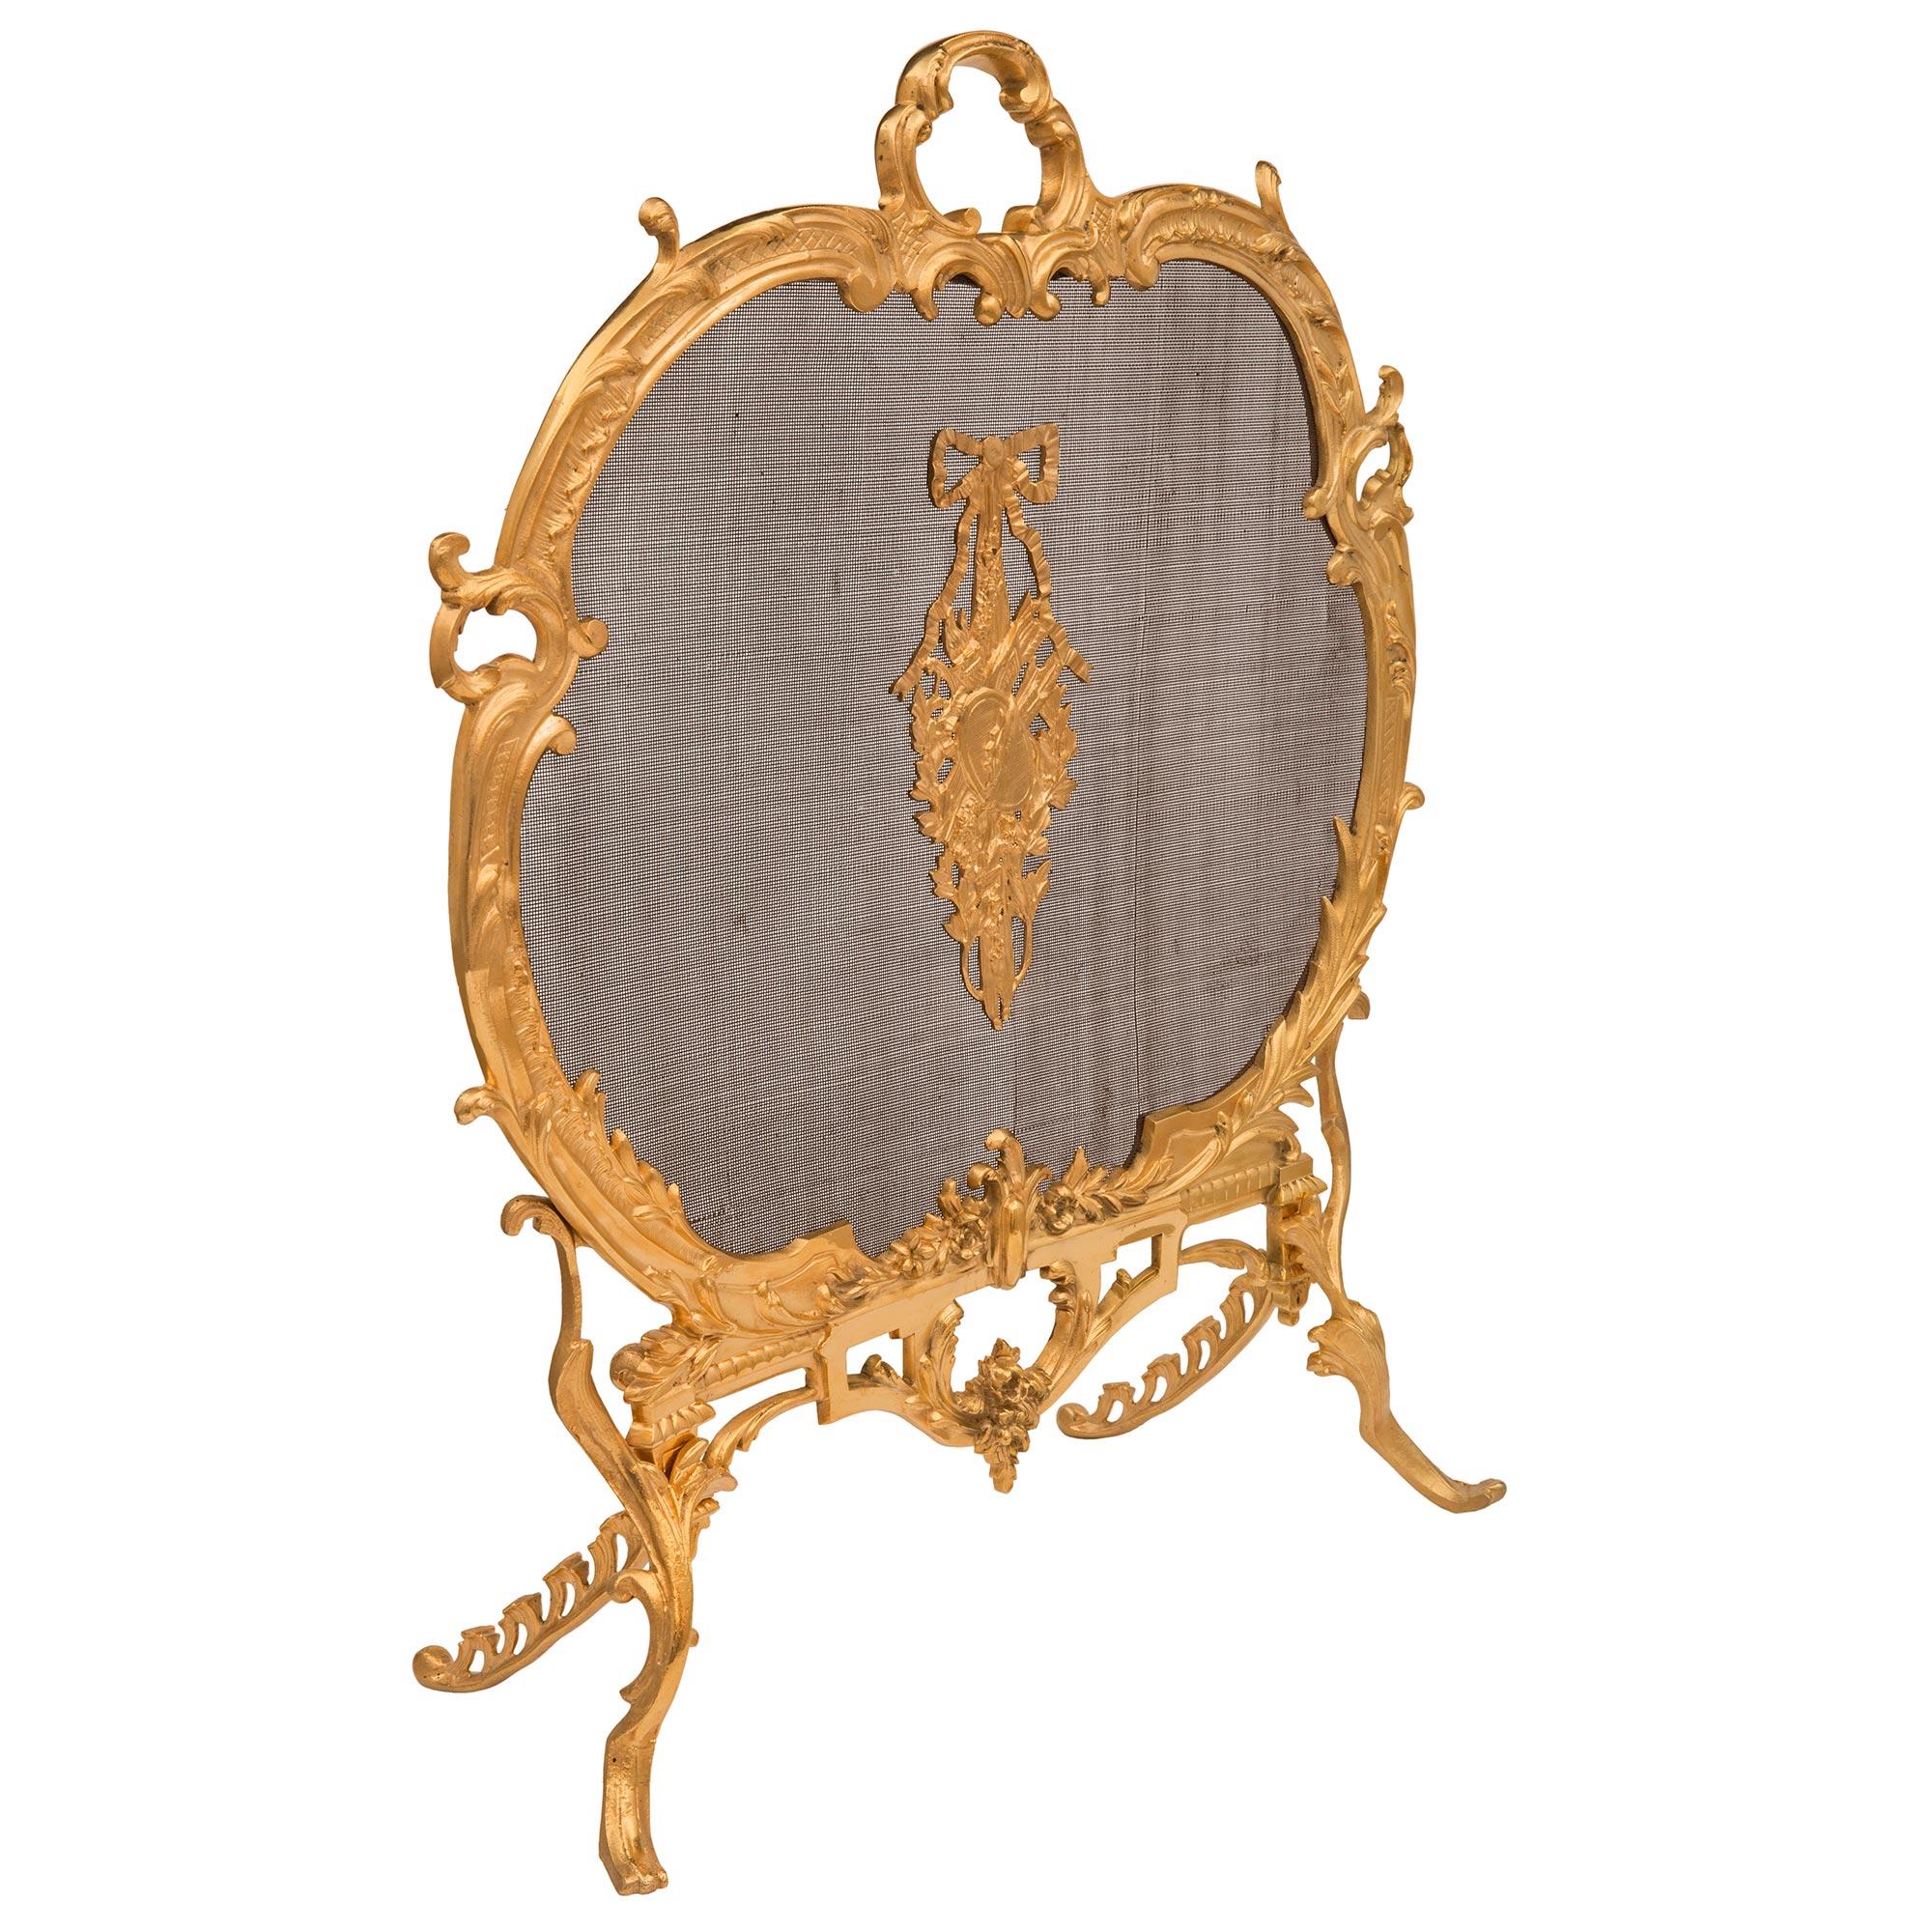 A striking French 19th century Louis XV st. ormolu and mesh fire screen. The fire screen is raised by beautiful scrolled foliate legs in the shape of acanthus leaves seemingly growing upwards centering a beautiful floral reserve with charming richly